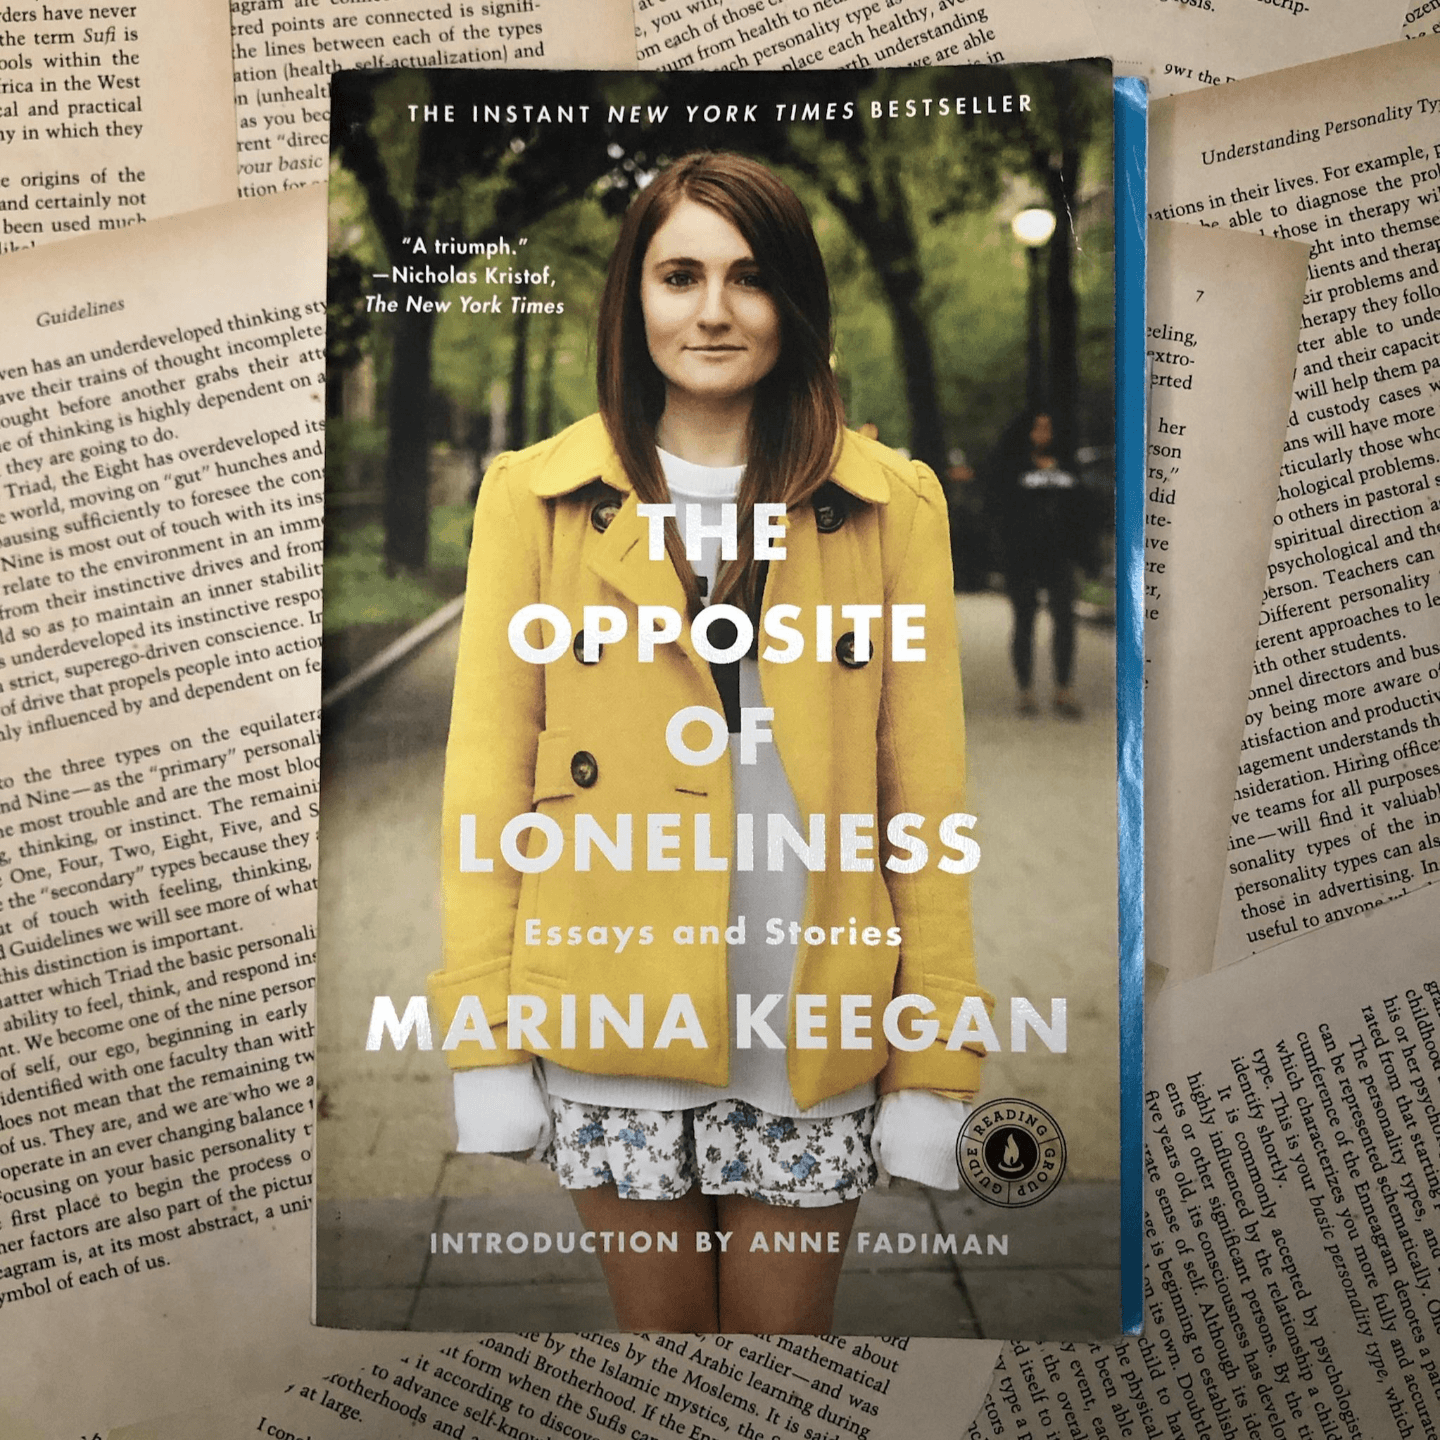 The Opposite of Loneliness by Marina Keegan [Paperback]